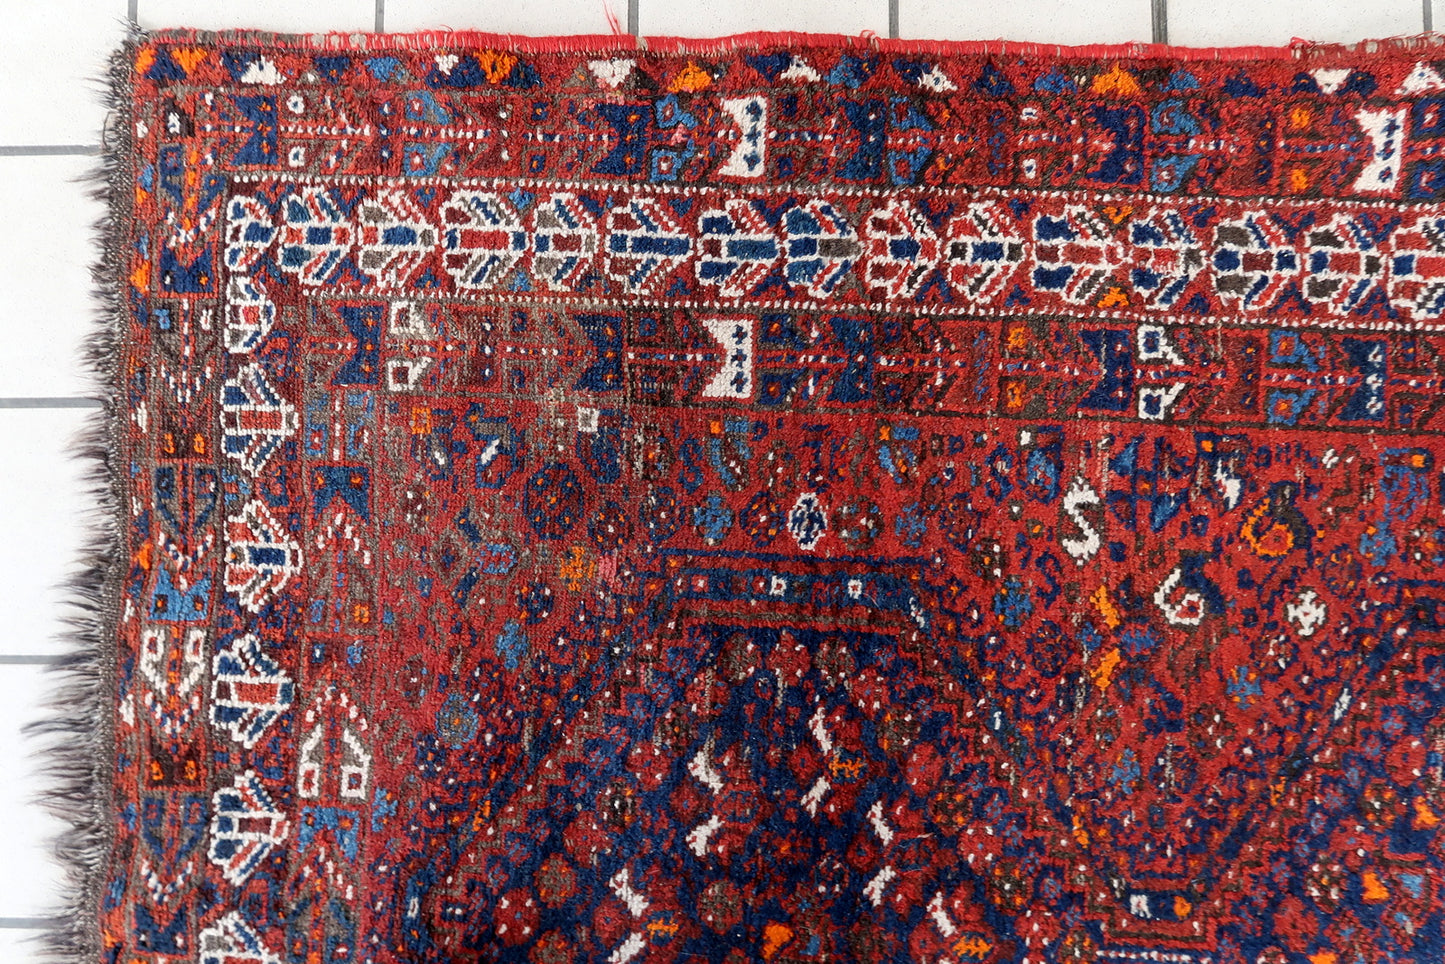 Intricate Geometric Patterns on Antique Persian Rug